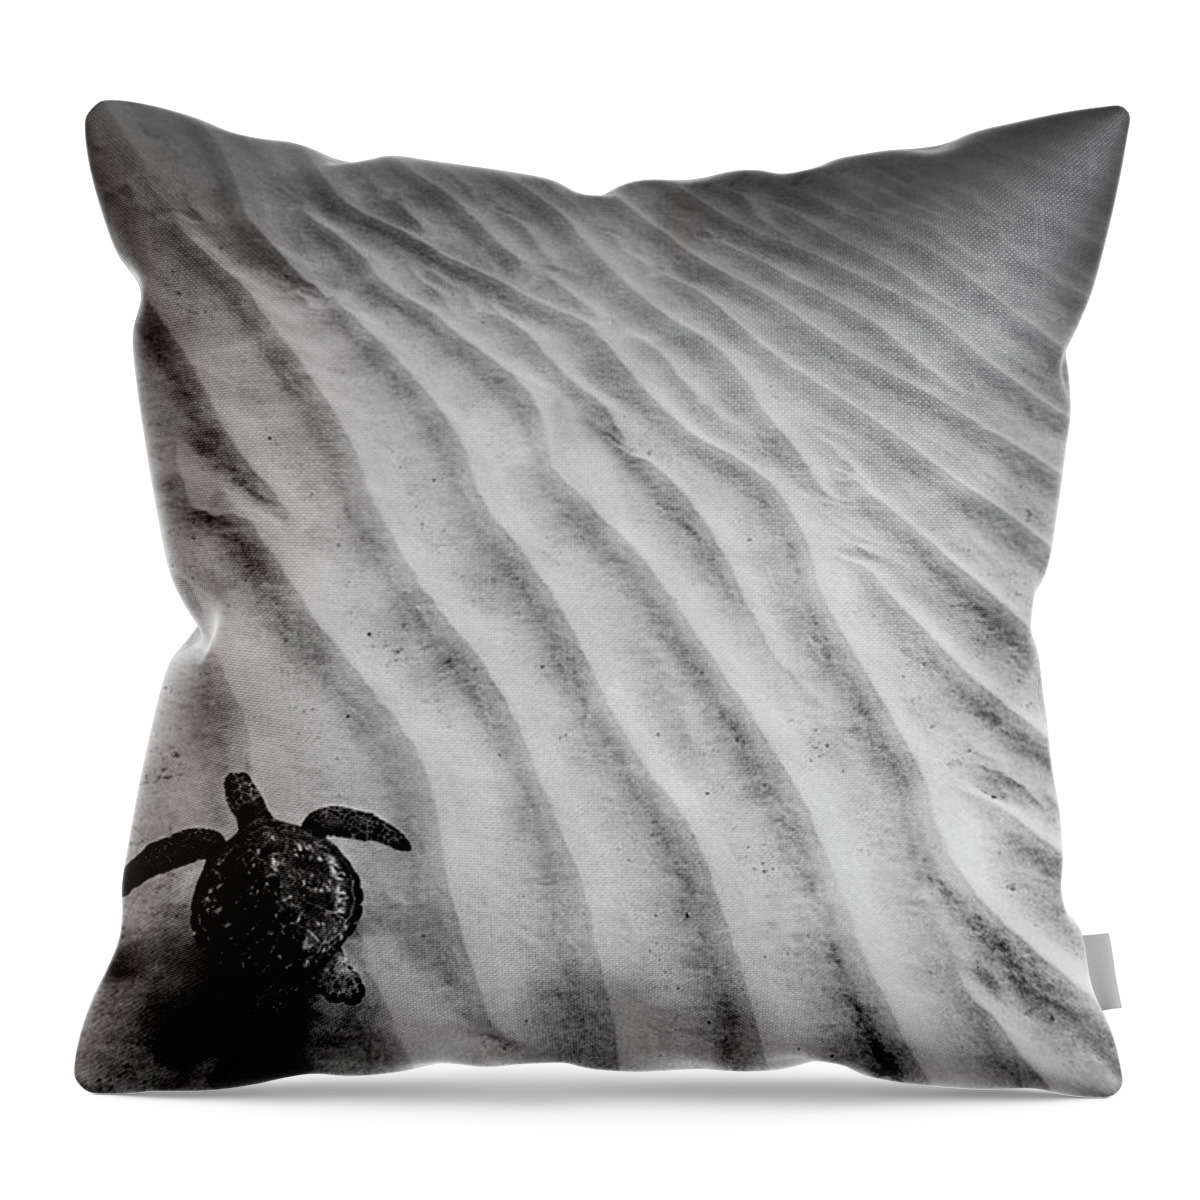 Sea Throw Pillow featuring the photograph Turtle Ridges by Sean Davey